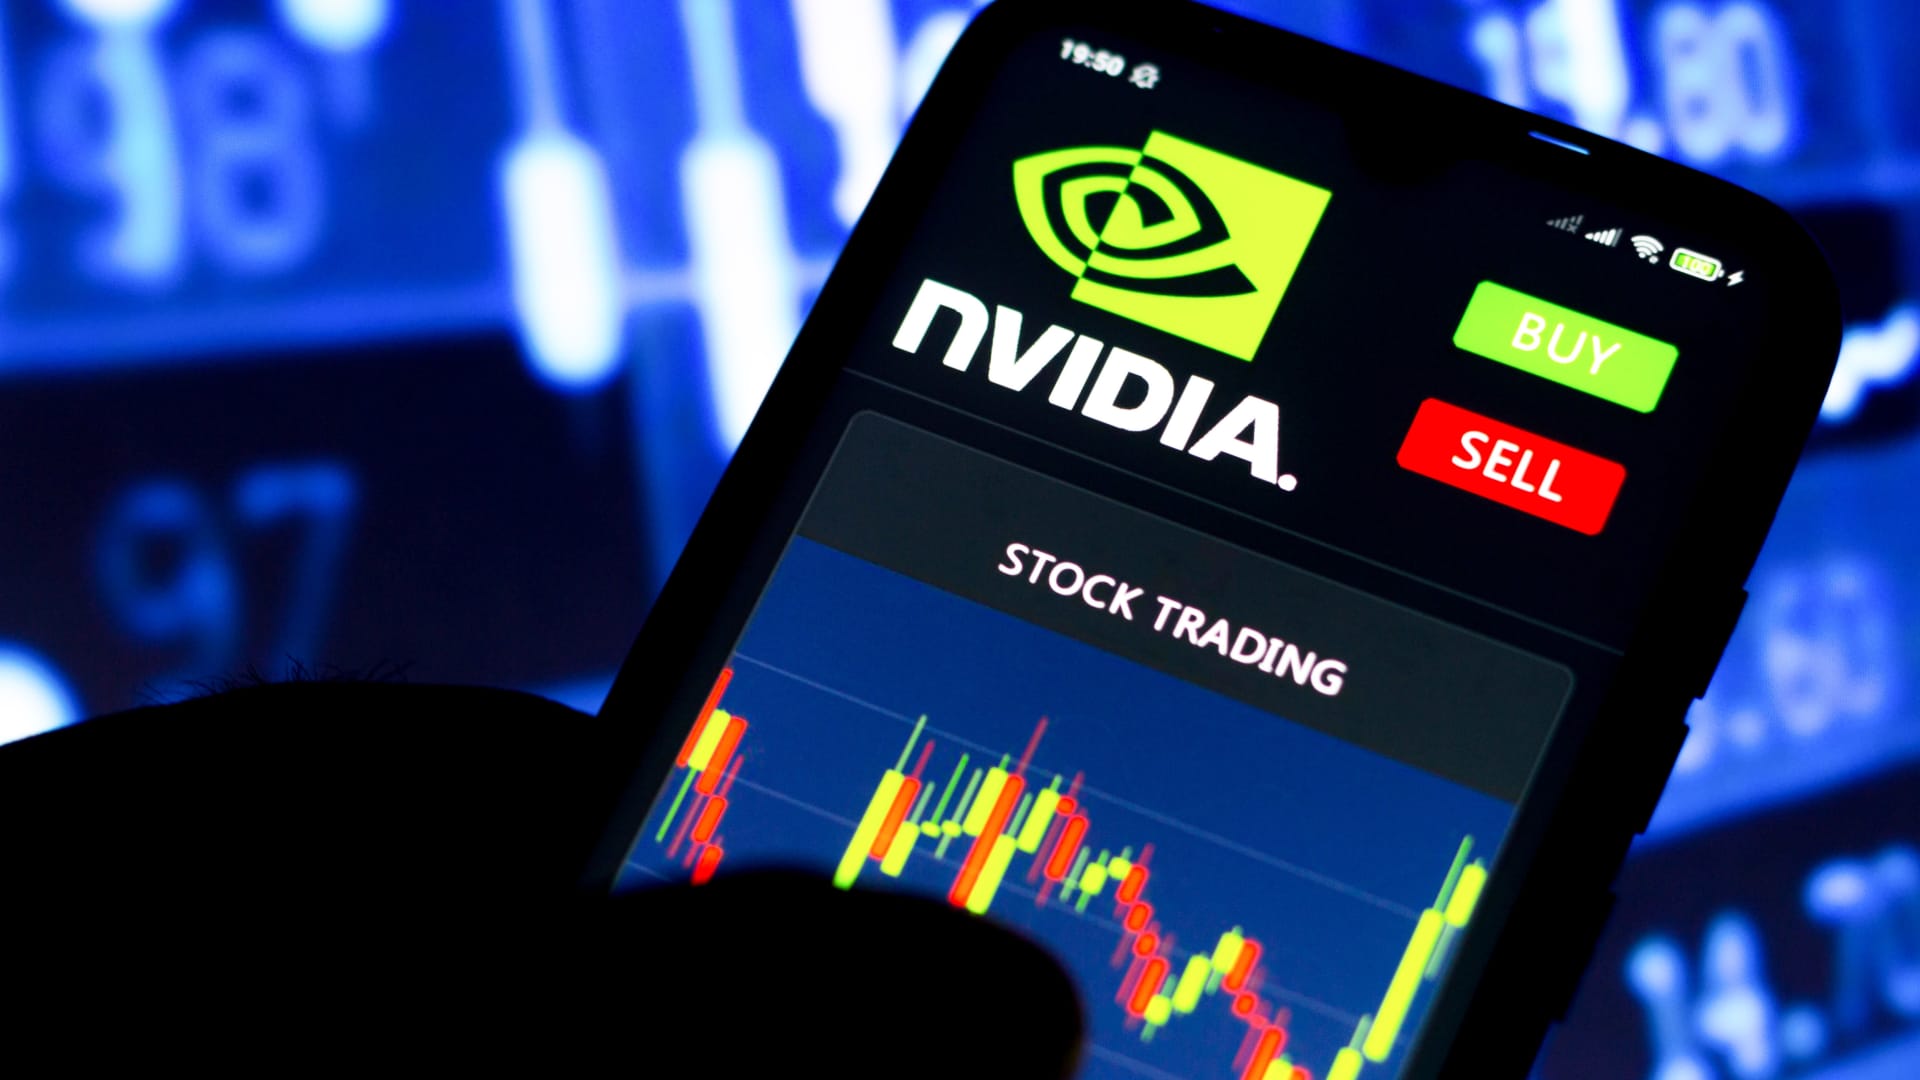 Nvidia rally is fueling FOMO in the total market, Evercore’s Julian Emanuel warns